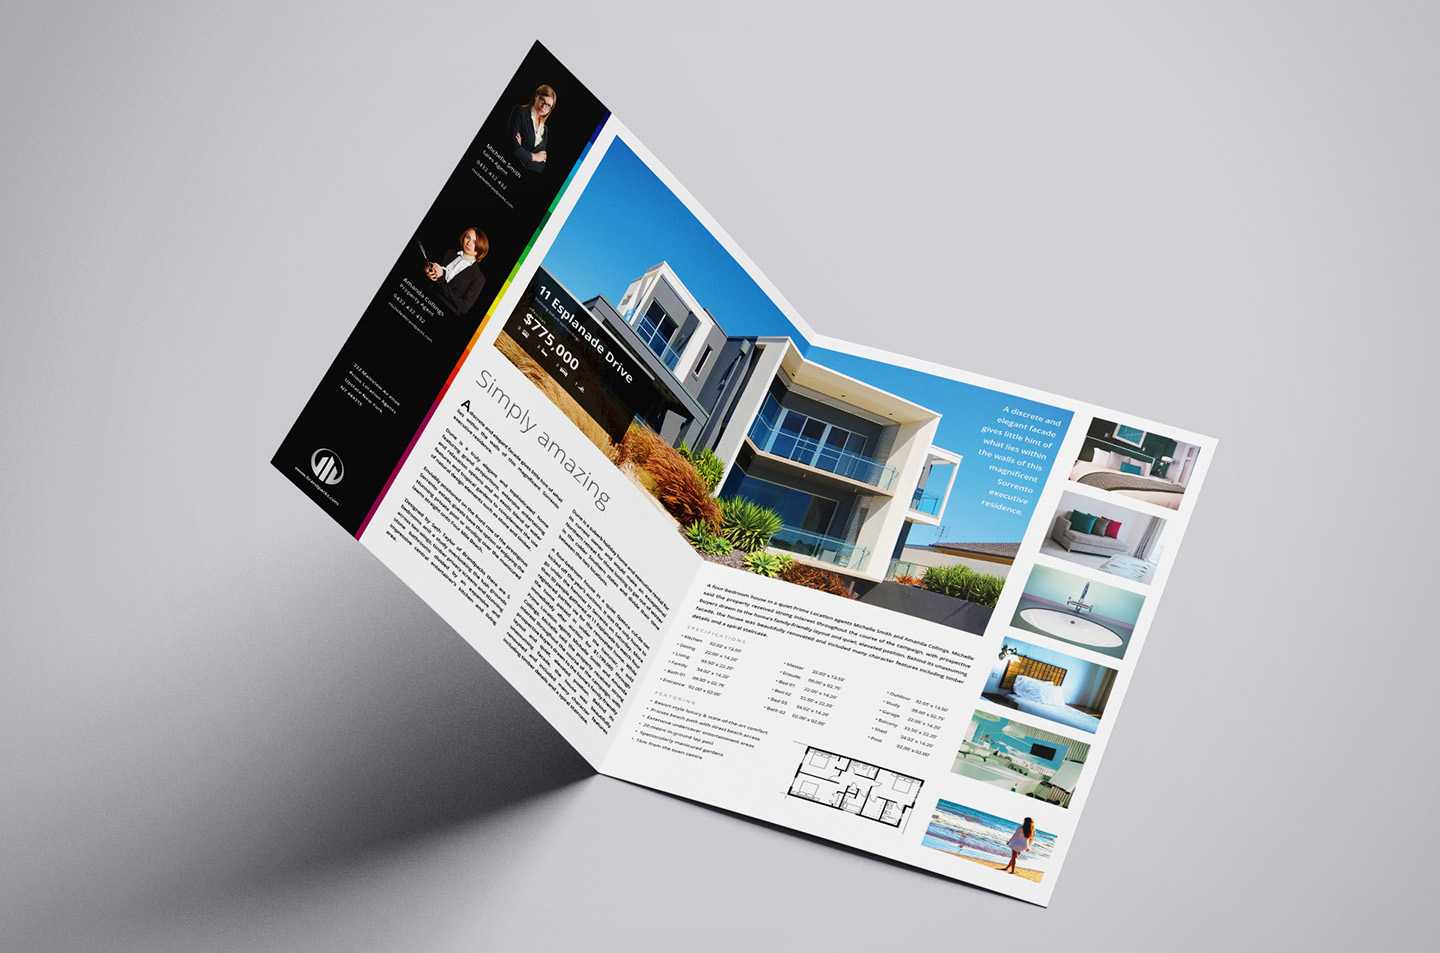 Real Estate Agency Brochure Template In Psd, Ai & Vector With Regard To Real Estate Brochure Templates Psd Free Download